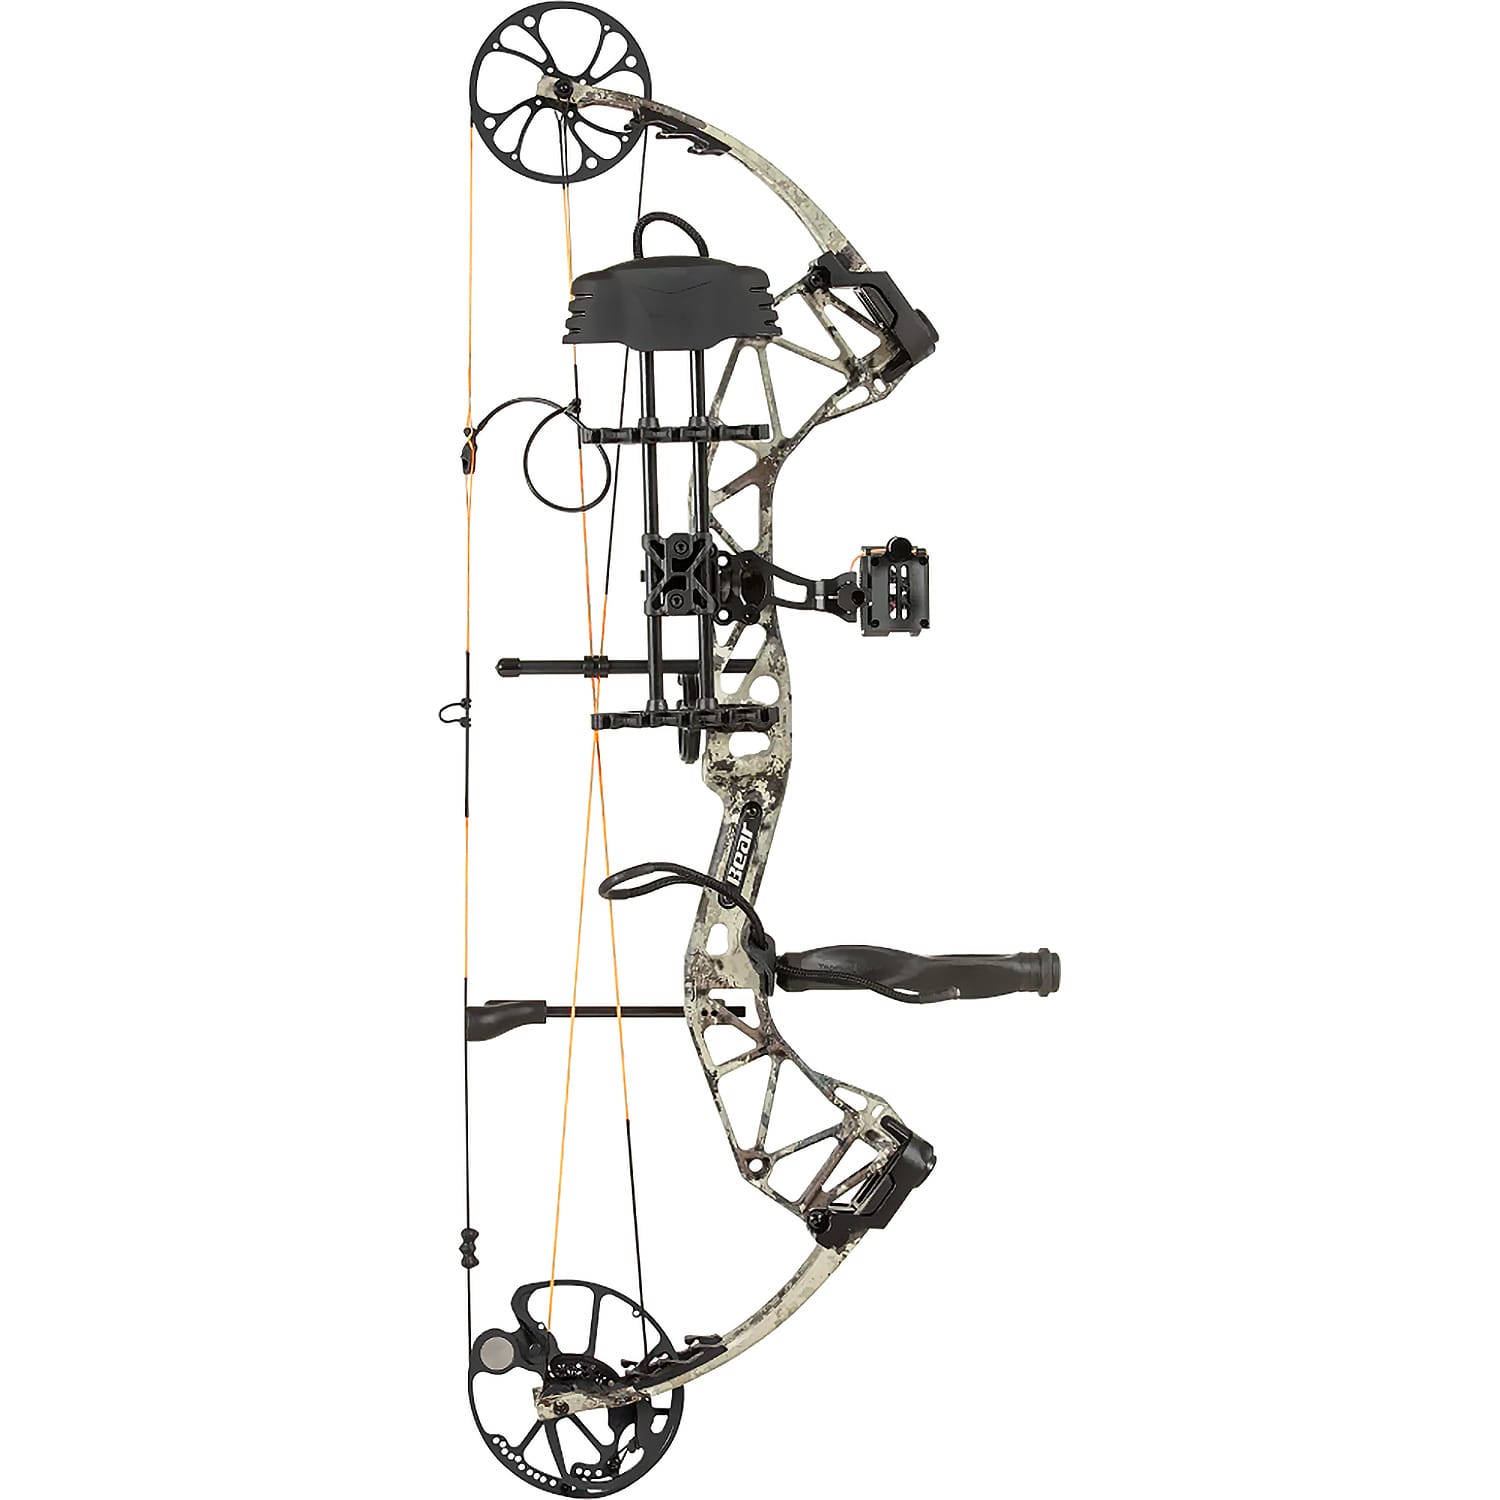 Bear Archery® Paradox RTH Compound Bow Package